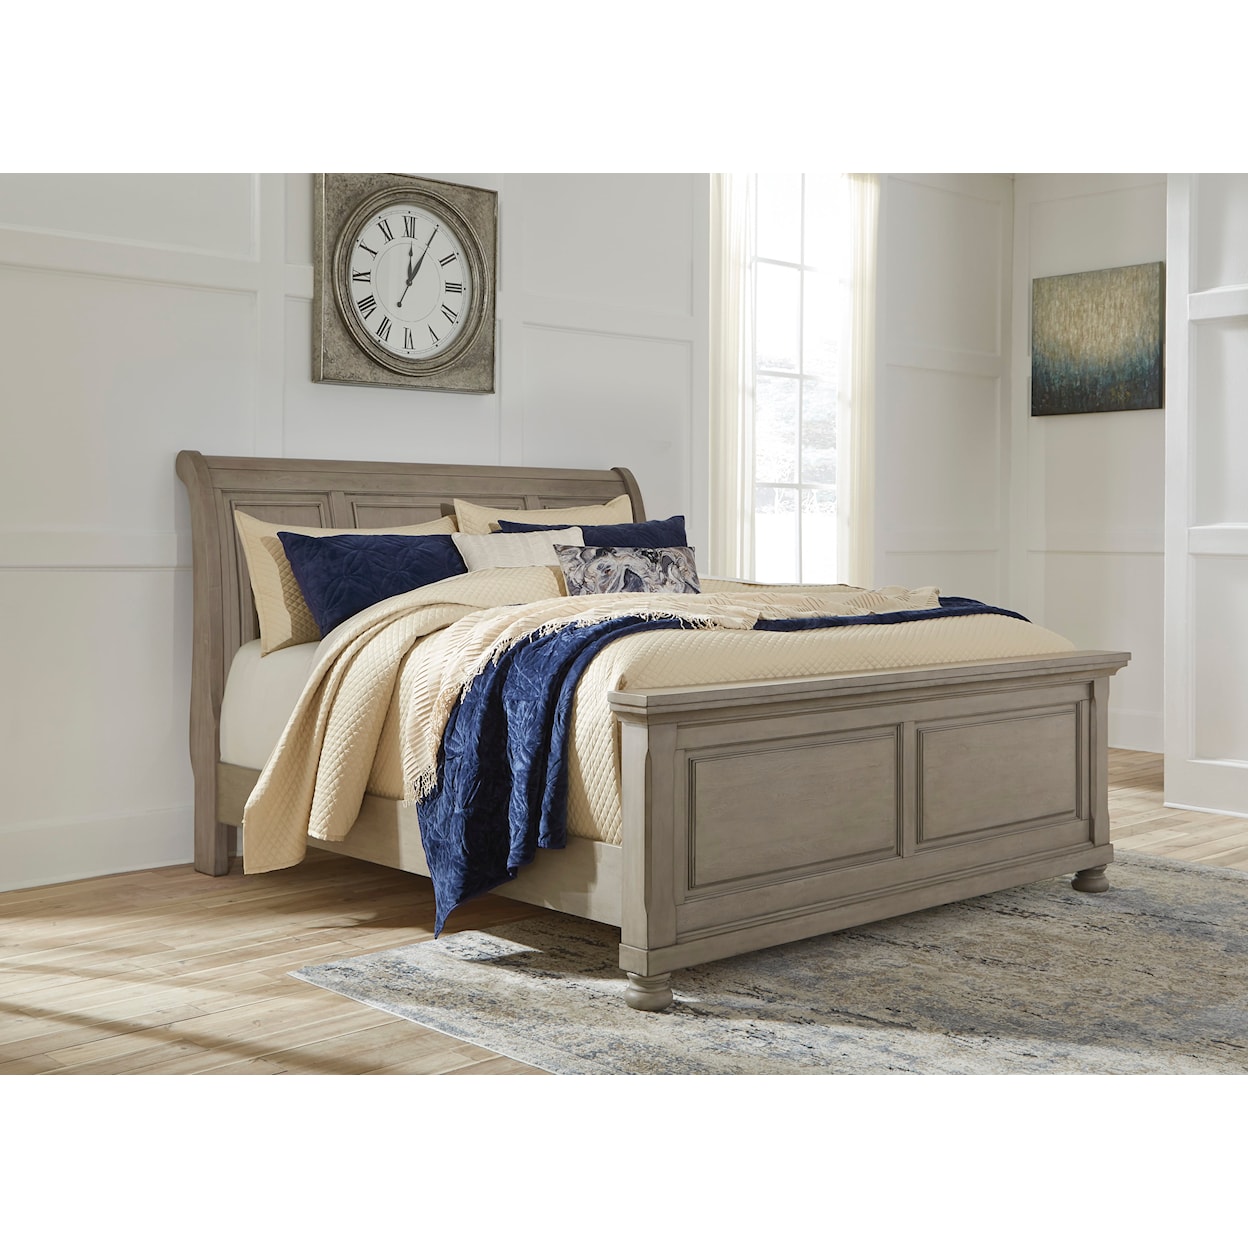 Signature Design by Ashley Furniture Lettner King Sleigh Bed